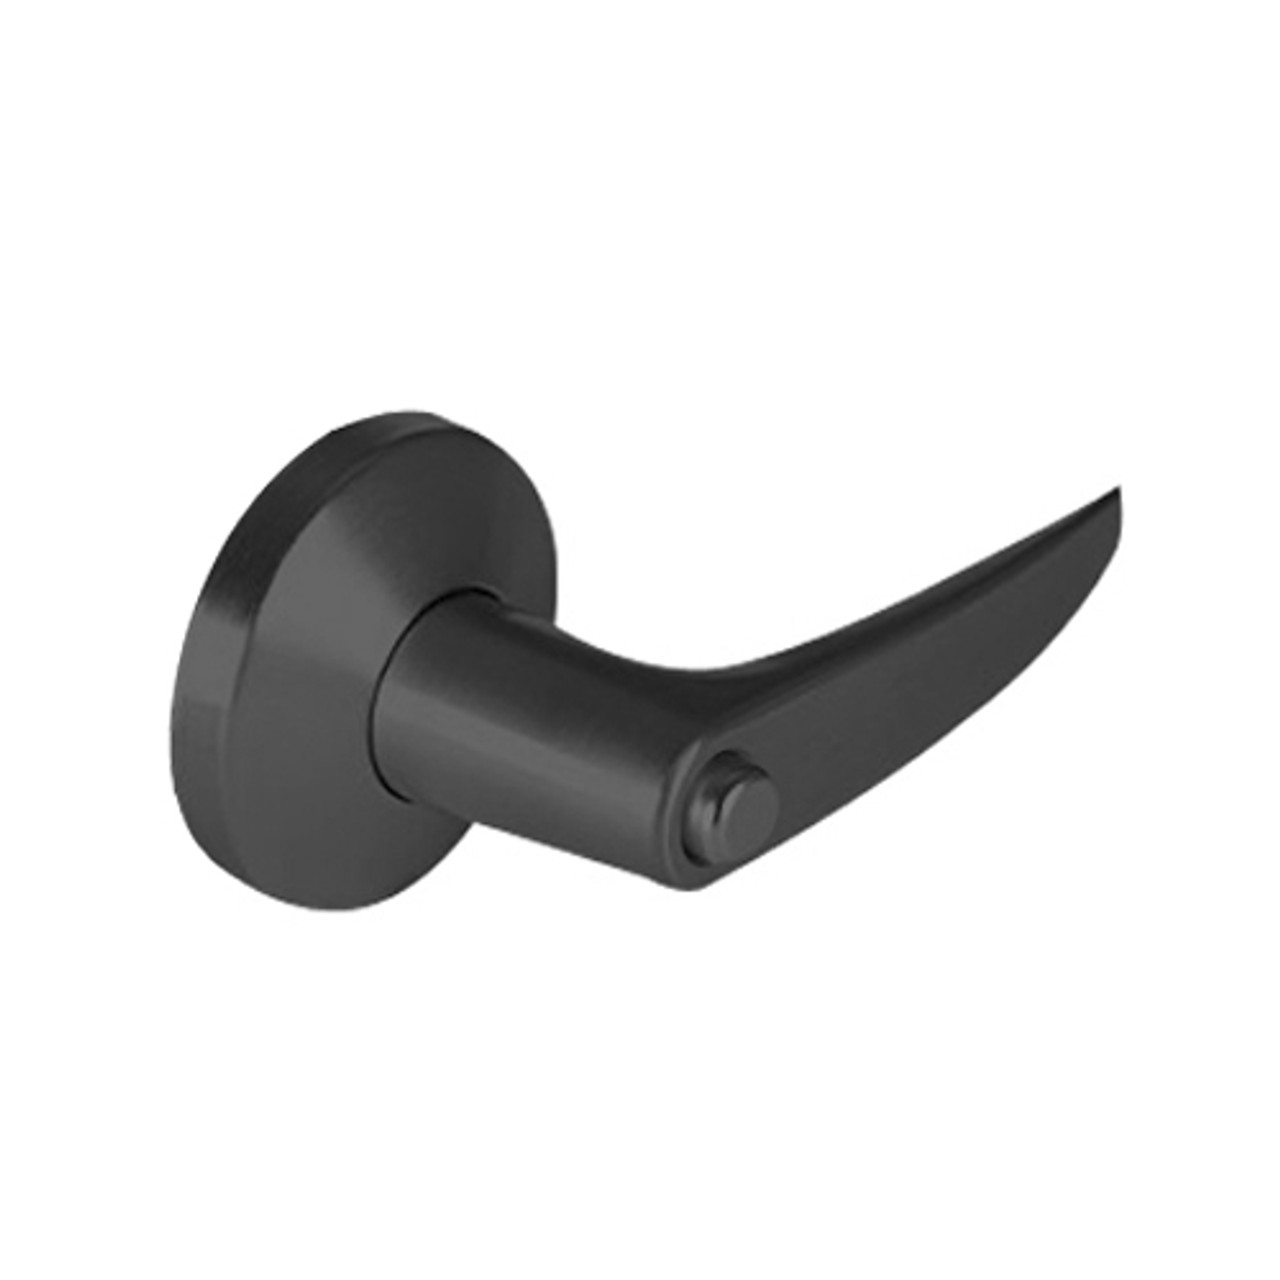 9K30L16KSTK622 Best 9K Series Privacy Heavy Duty Cylindrical Lever Locks with Curved Without Return Lever Design in Black